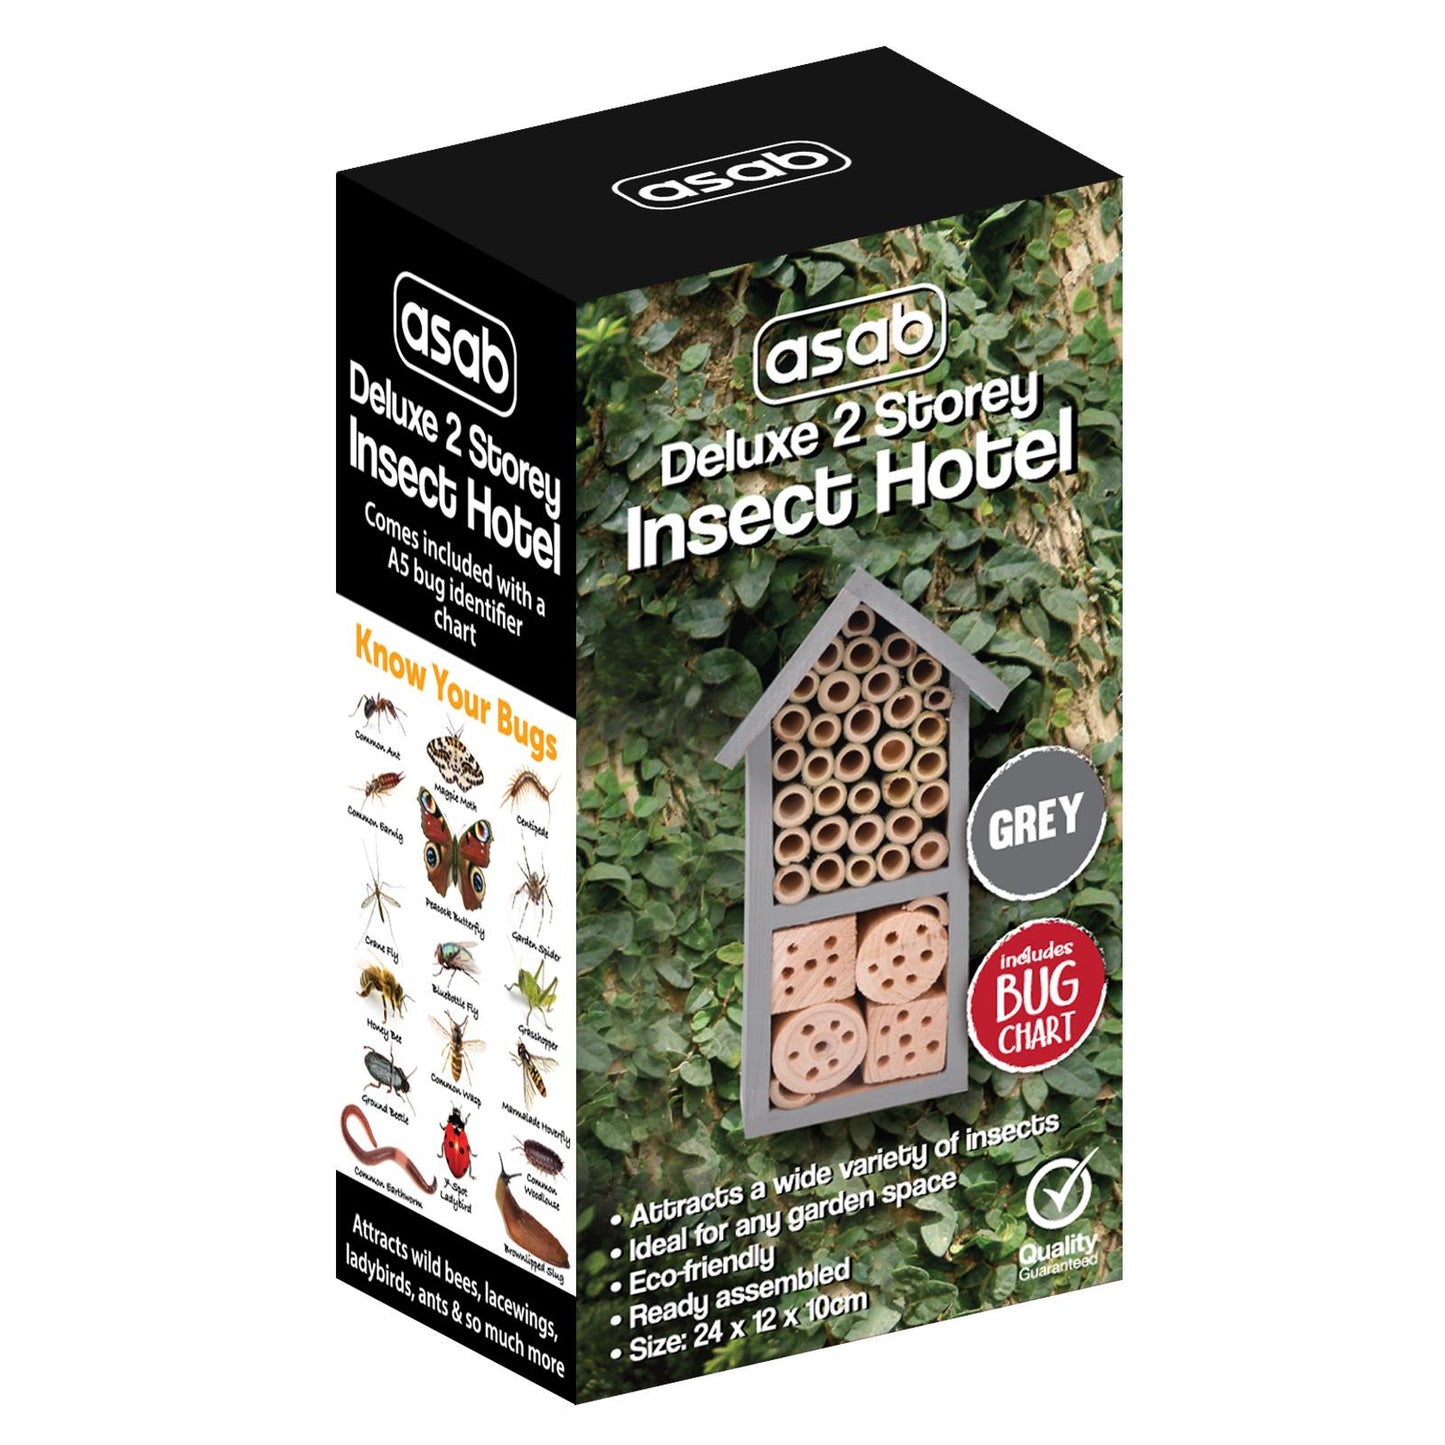 Handmade Insect Habitat for Bees, Butterflies, and Ladybugs